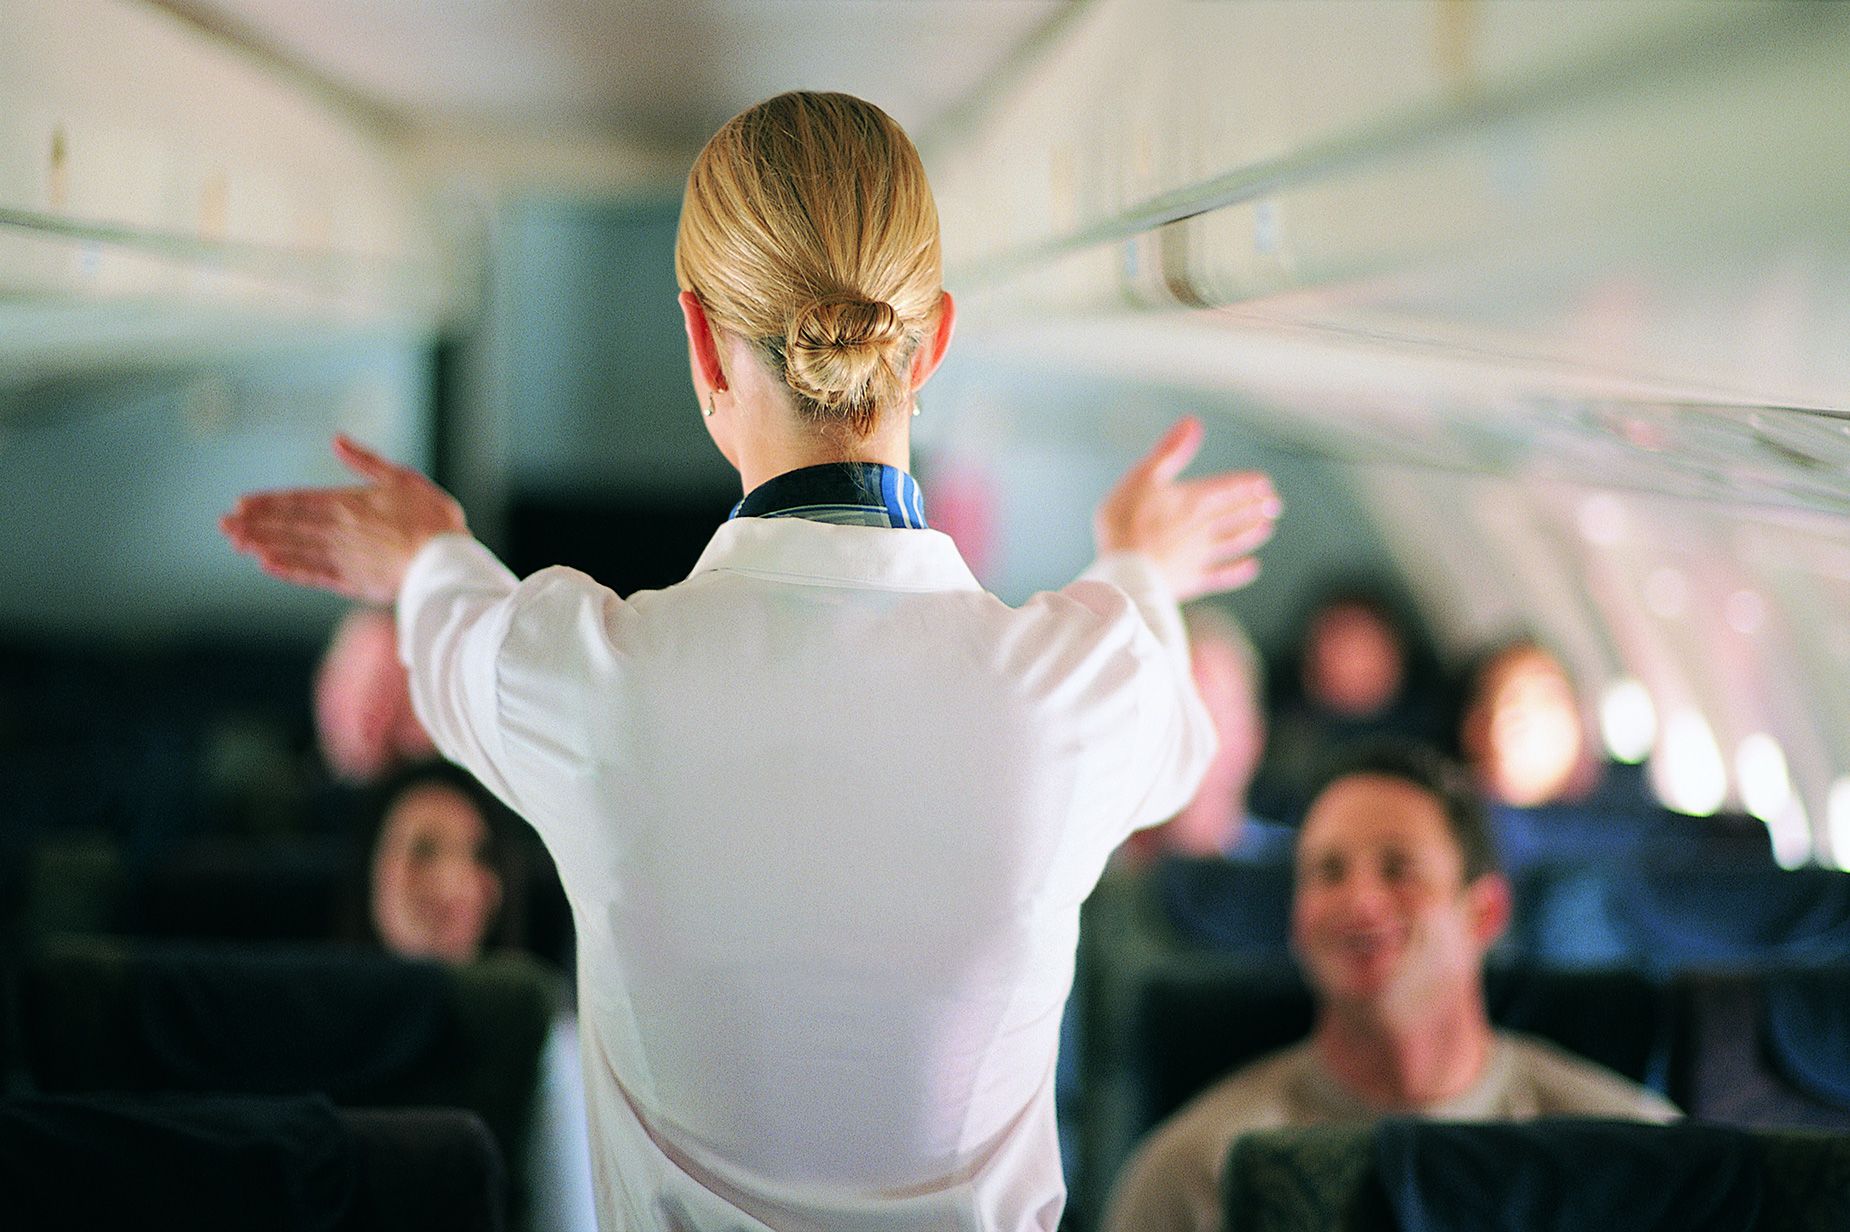 8 Things People Expect Flight Attendants To Do That Aren't Their Jobs